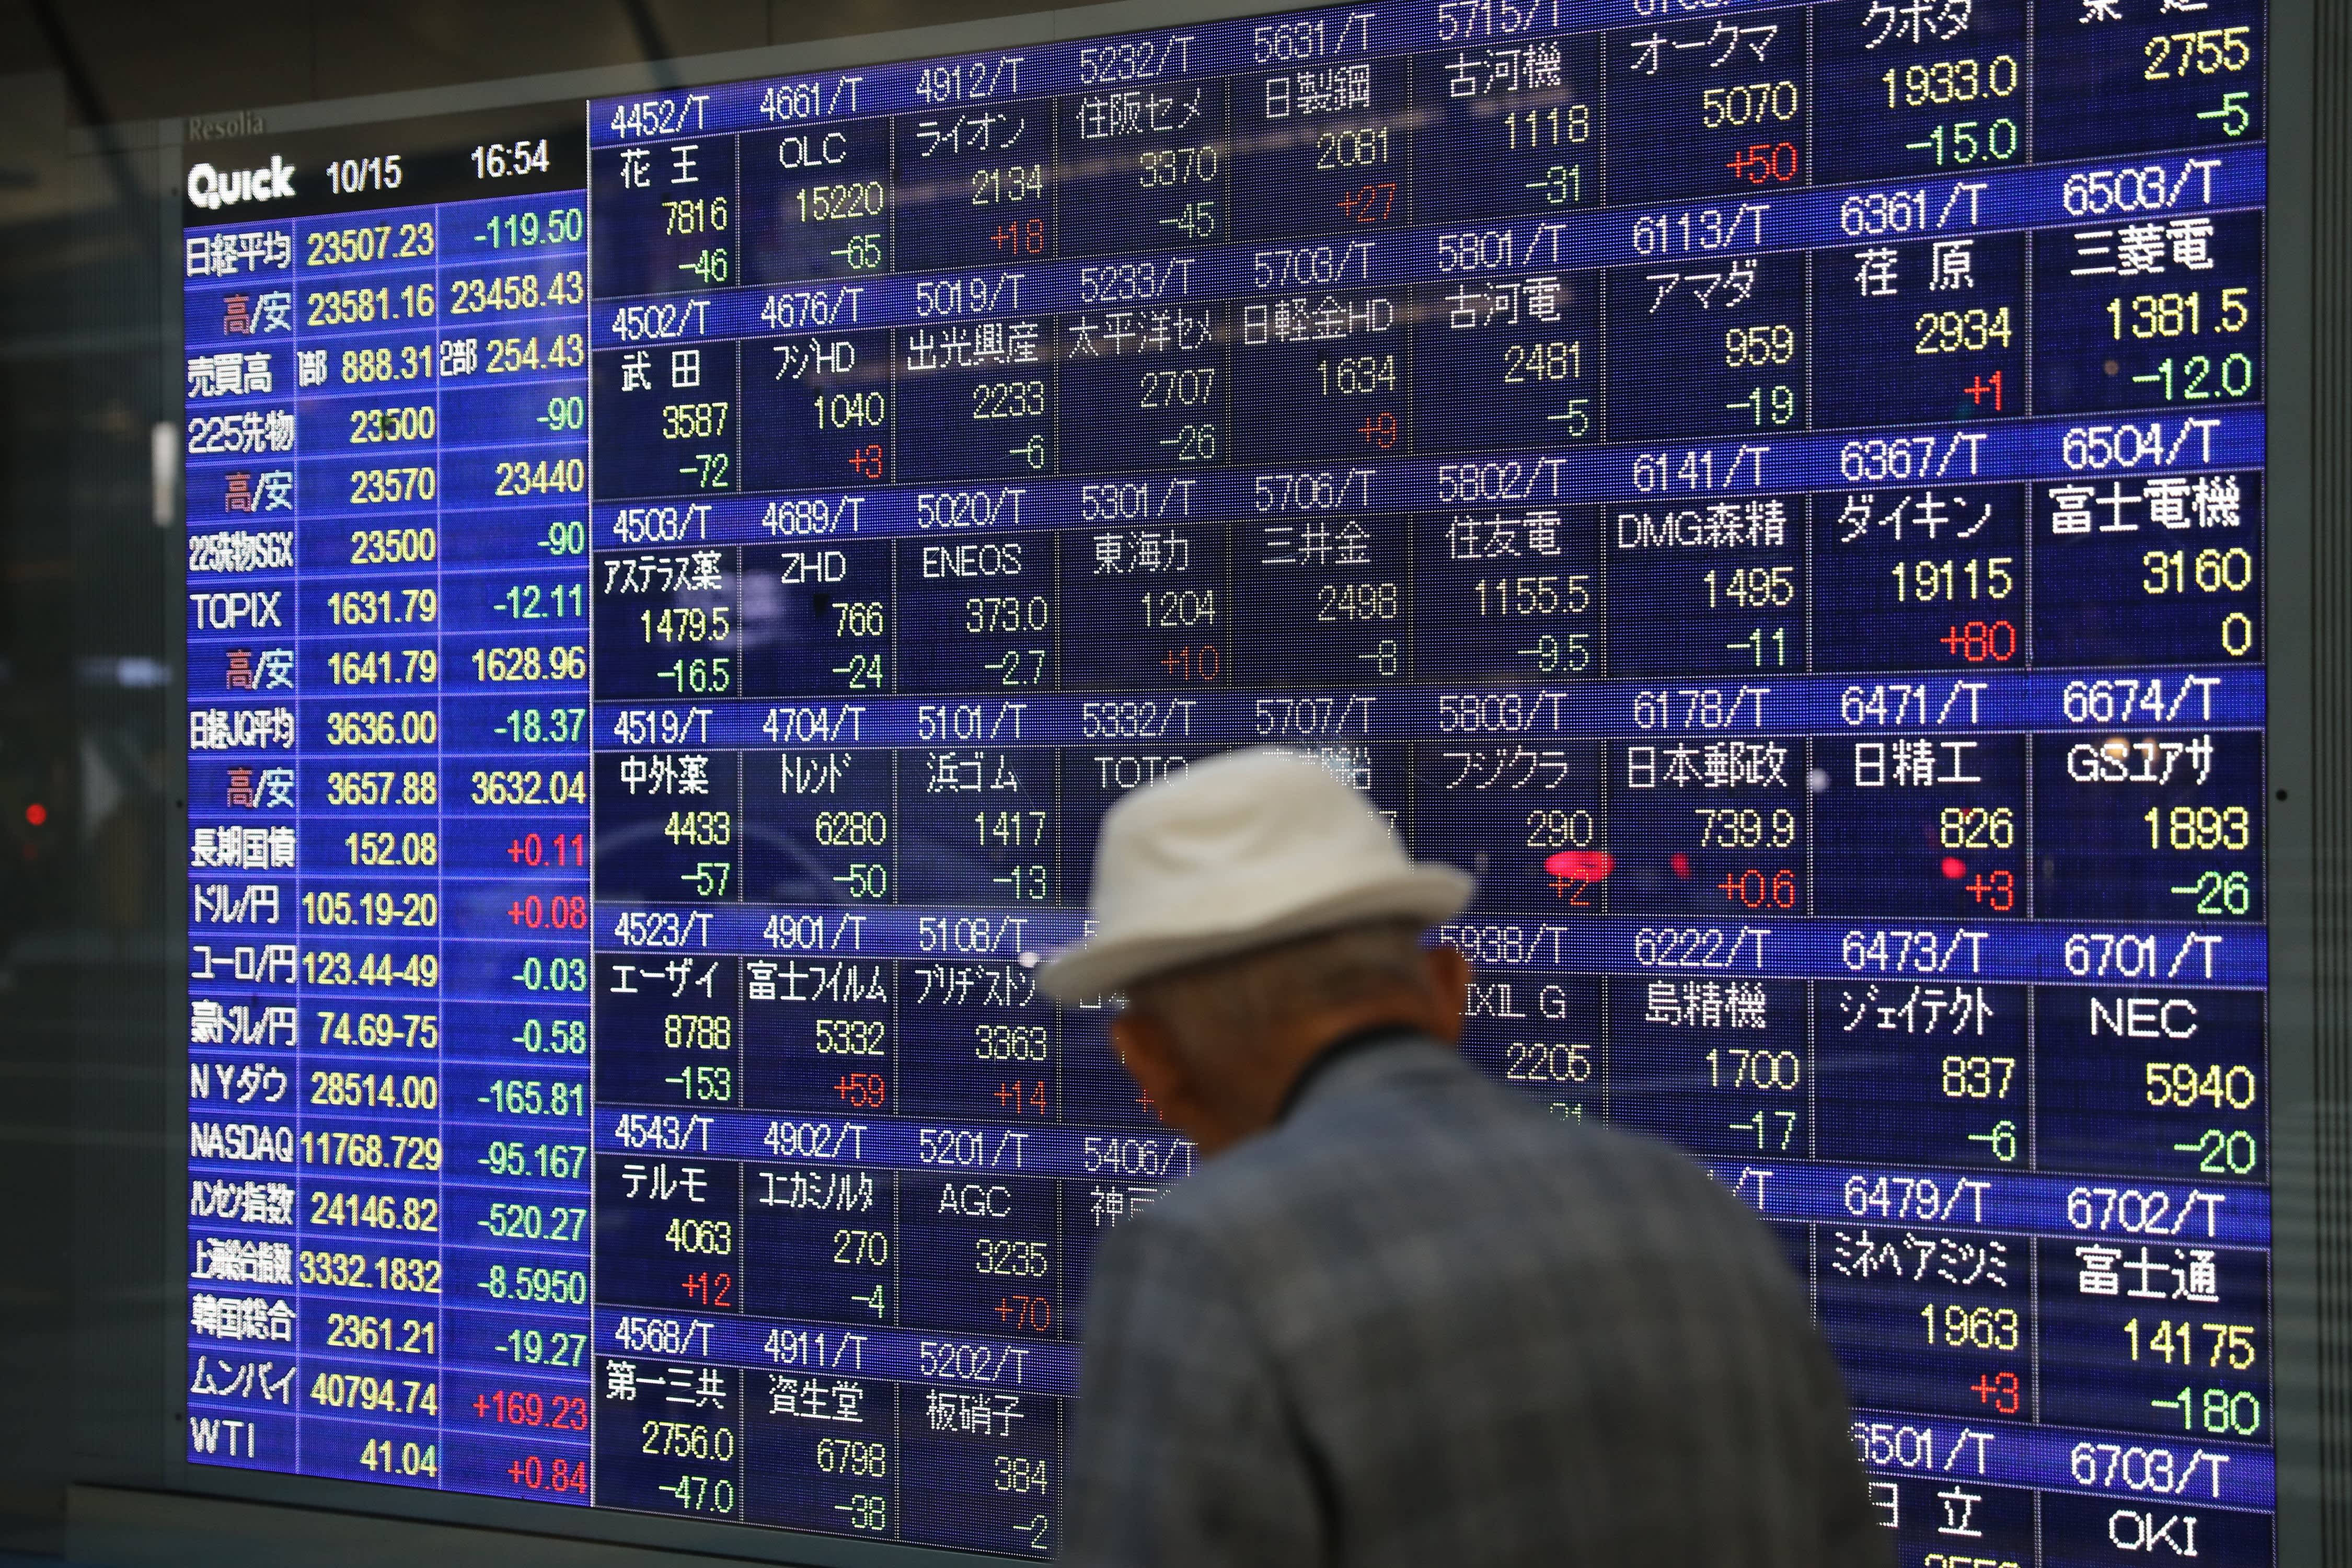 Stocks decline in South Korea and business sentiment improves in Japan